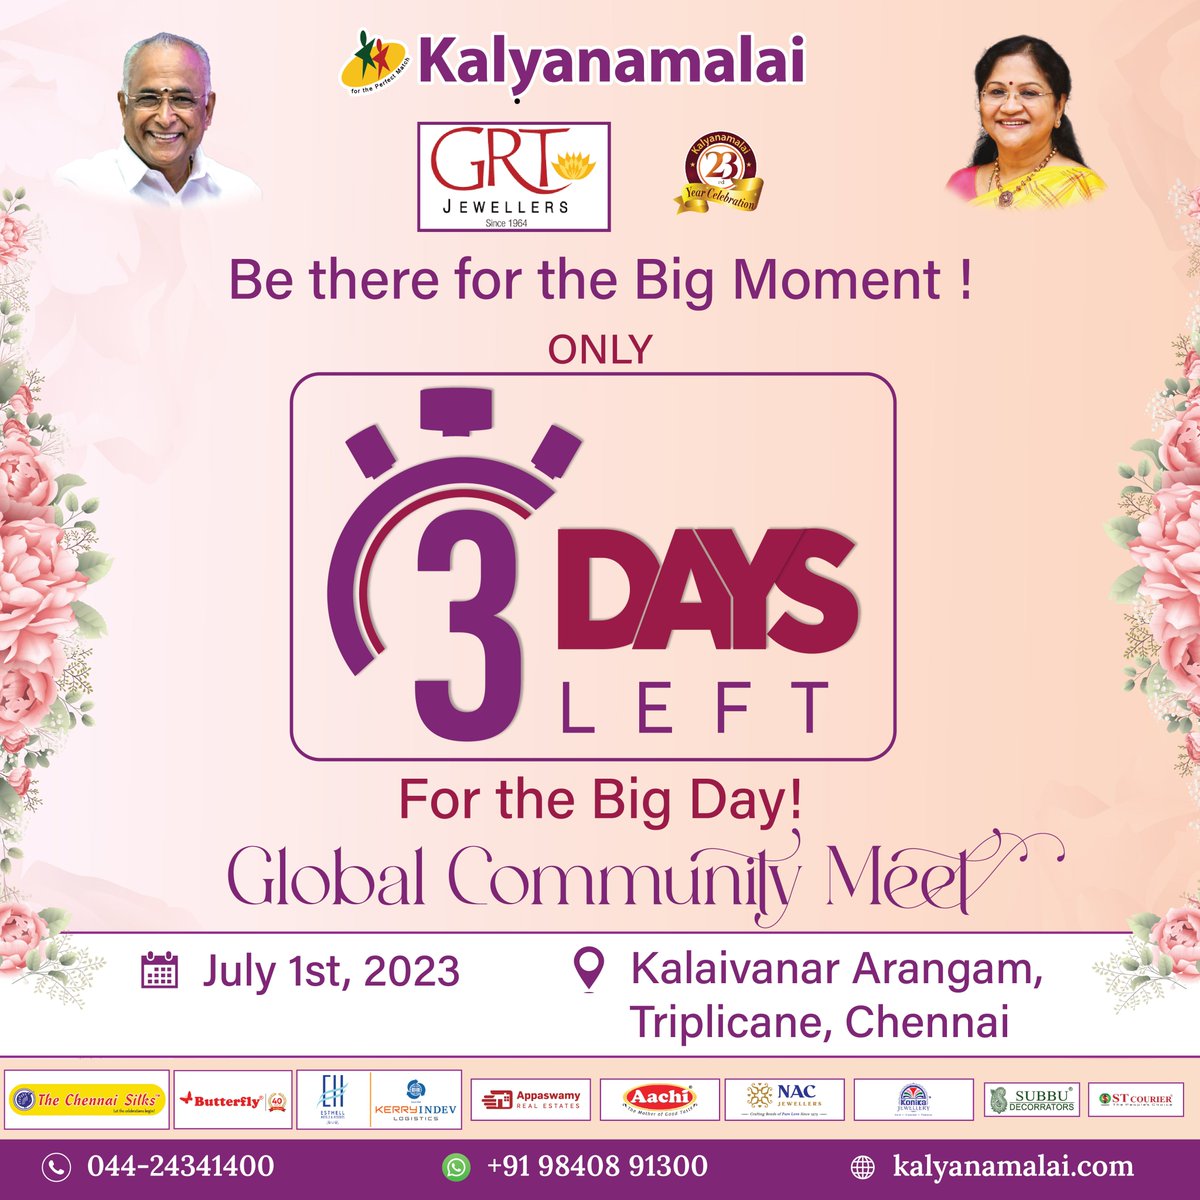 3 days until #Kalyanamalai's Global Community Meet! 🤩 

Join us  at the glamorous Kalaivanar Arangam, Triplicane, Chennai. 💯 

Don't miss out on this once-in-a-lifetime experience ! For more info : +91-9840891300/+91-9840891500 

#3DaystoGo #KMMatrimony #Tamilmatrimony